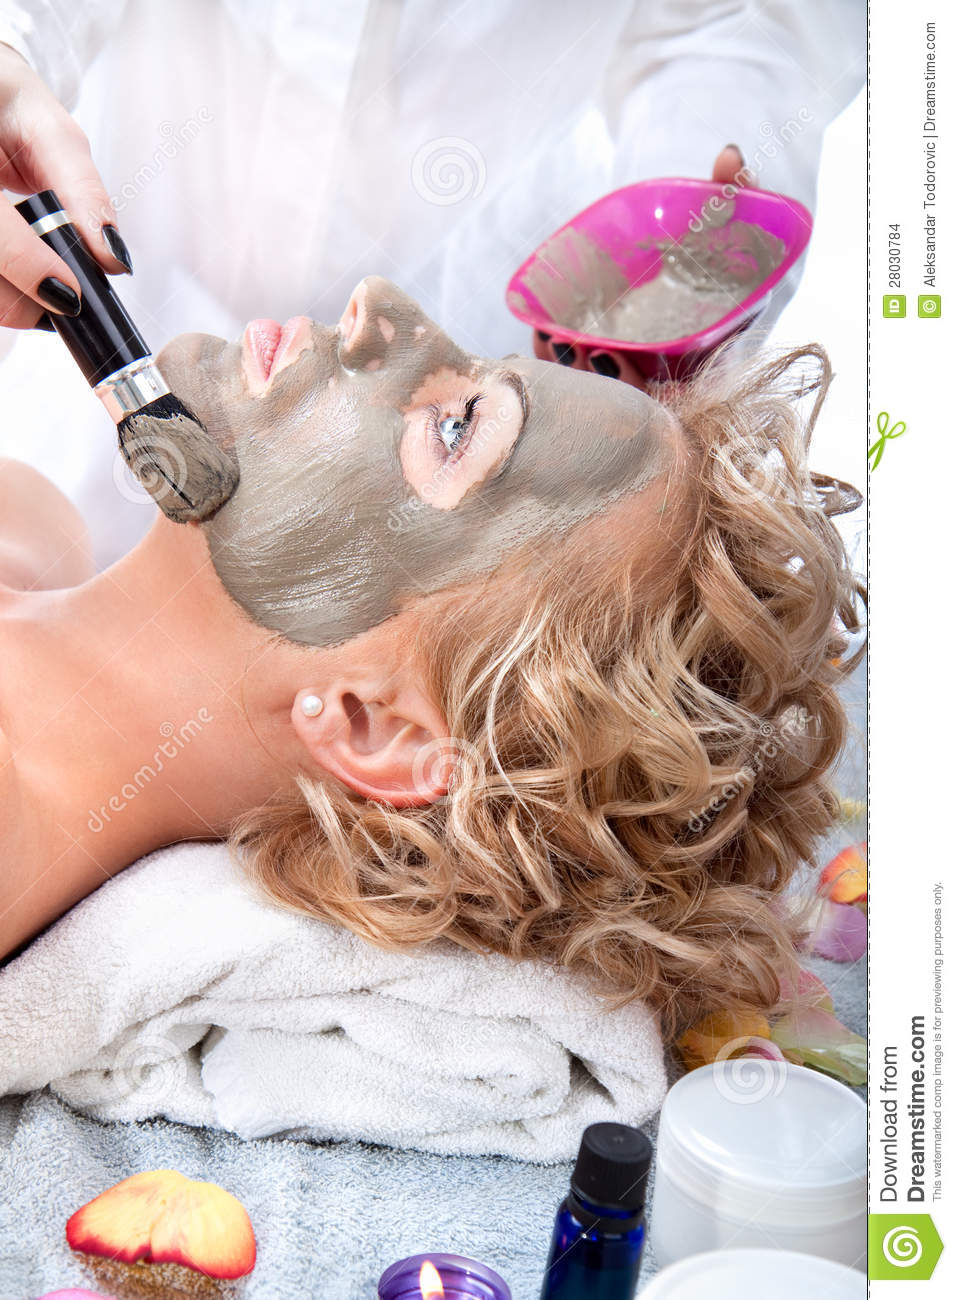 Applying Mud Face Pack On Woman Face Stock Images   Image  28030784